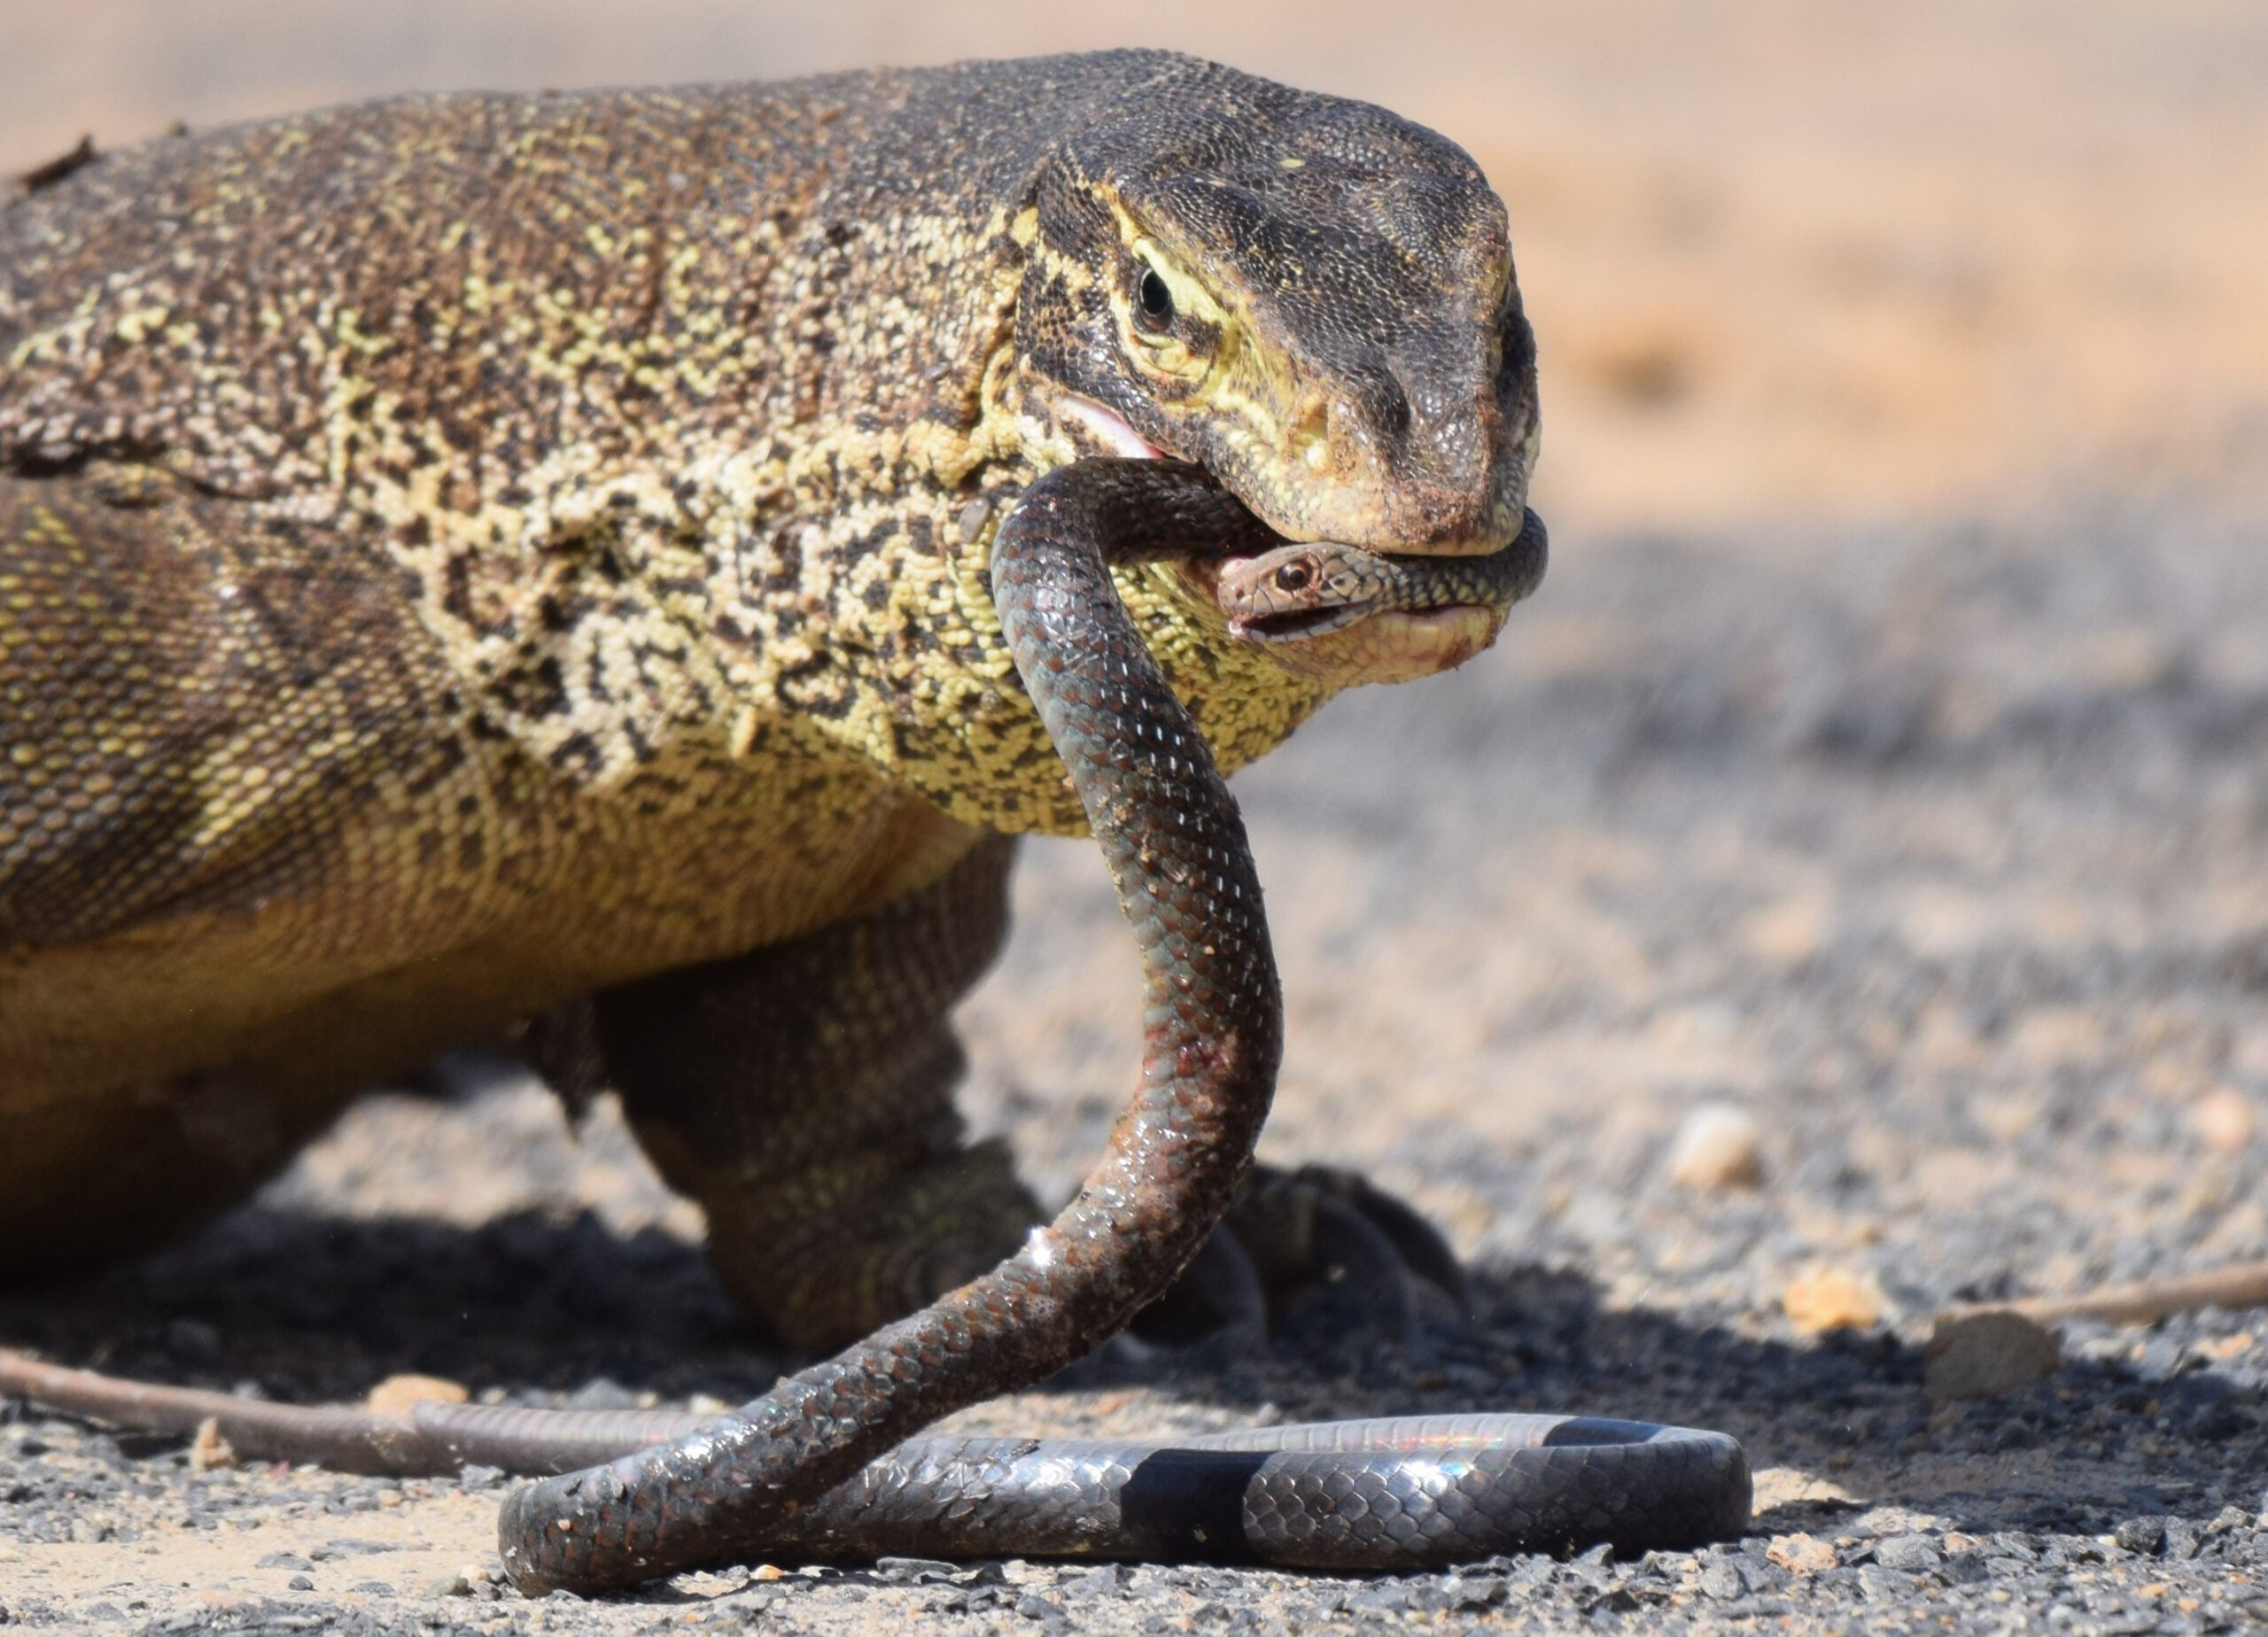 Venom Wars: The Lizards and Snakes Fighting Through Evolution